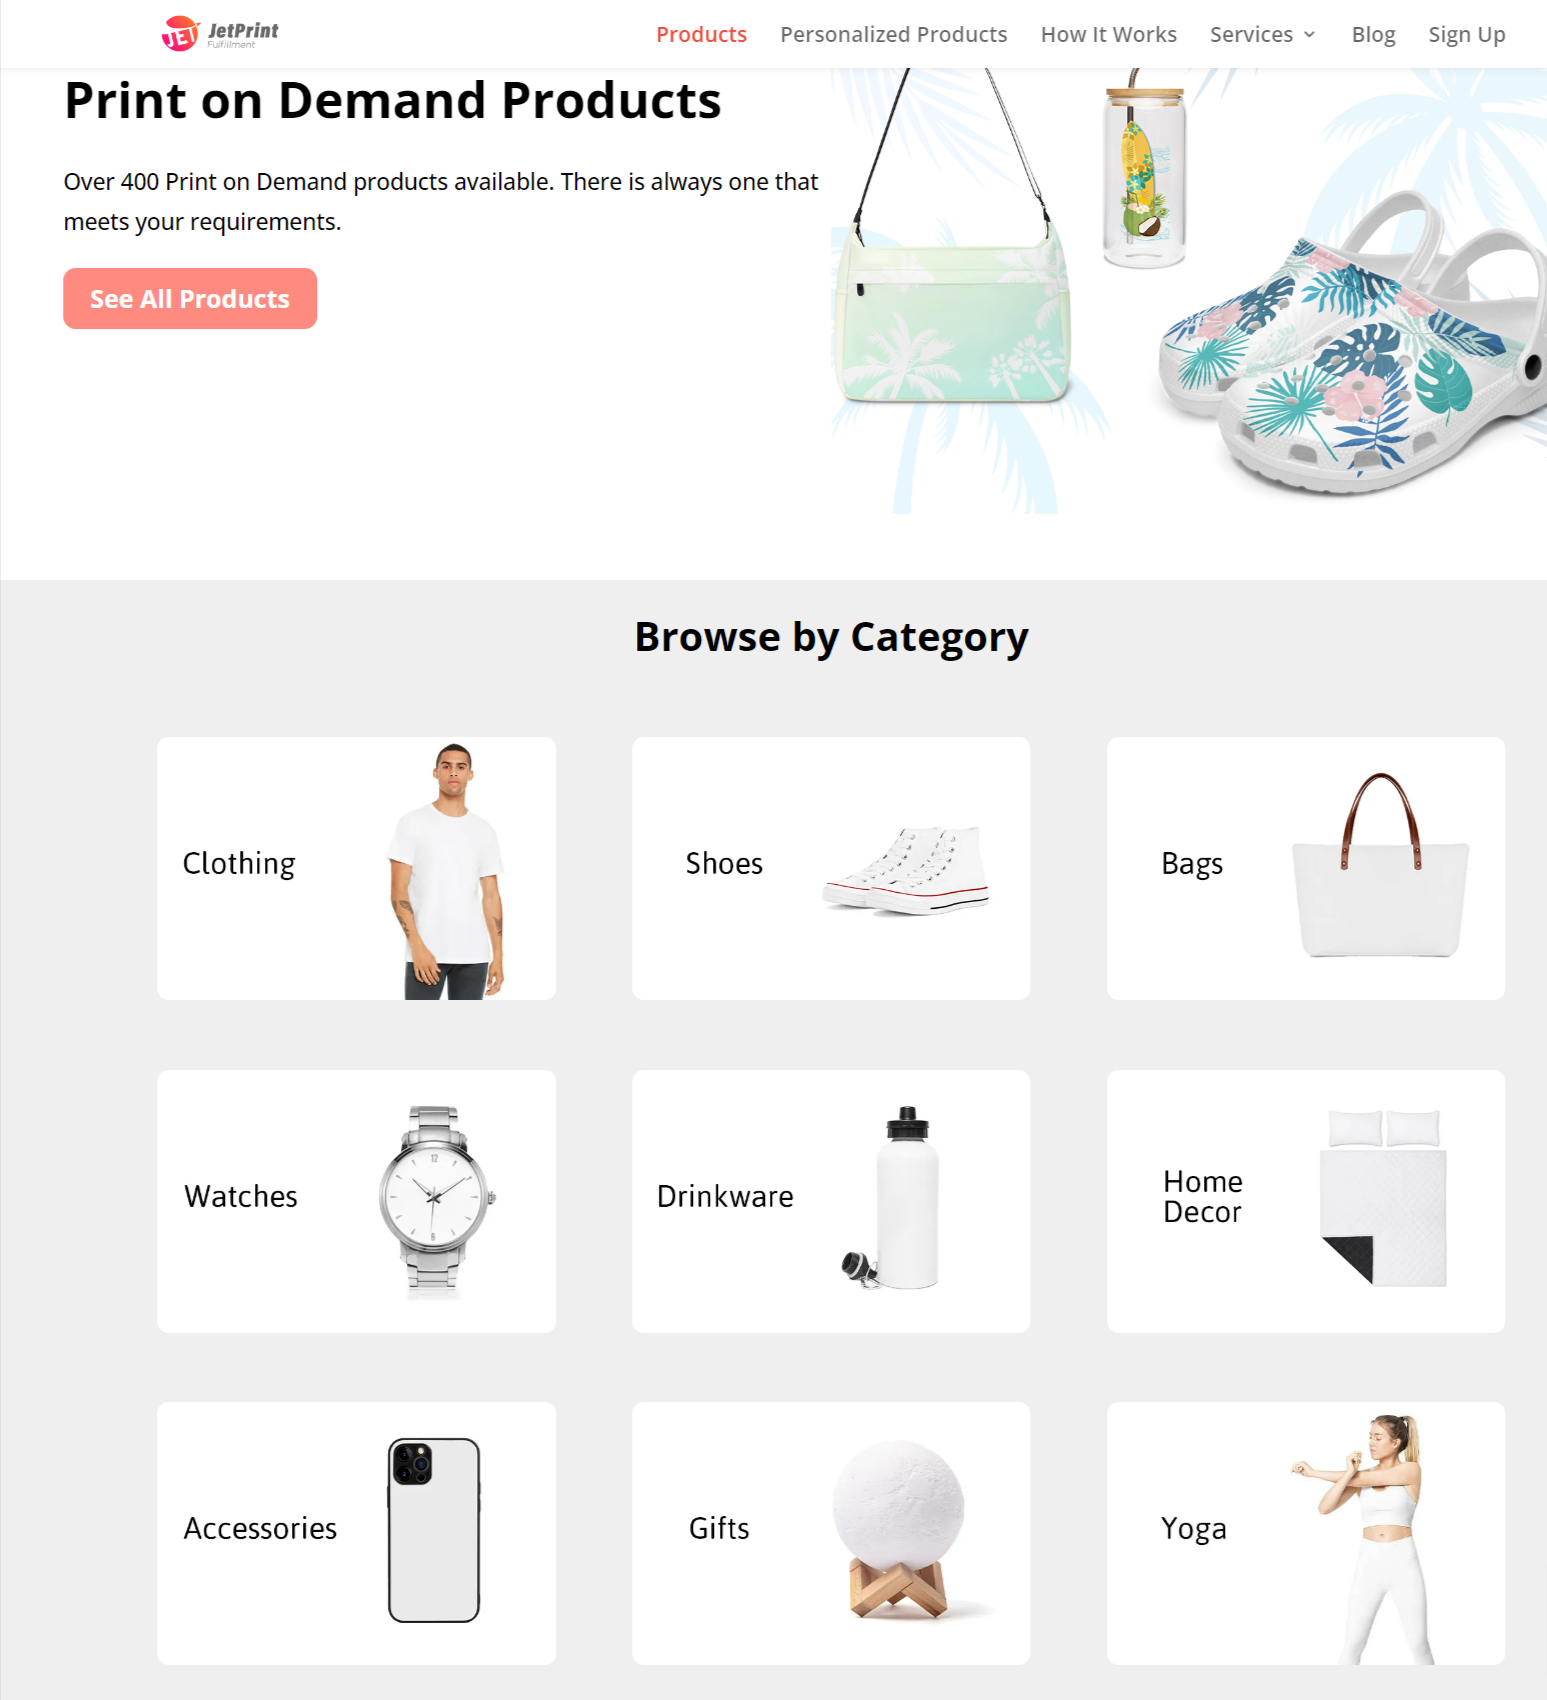 Wide range of customizable products